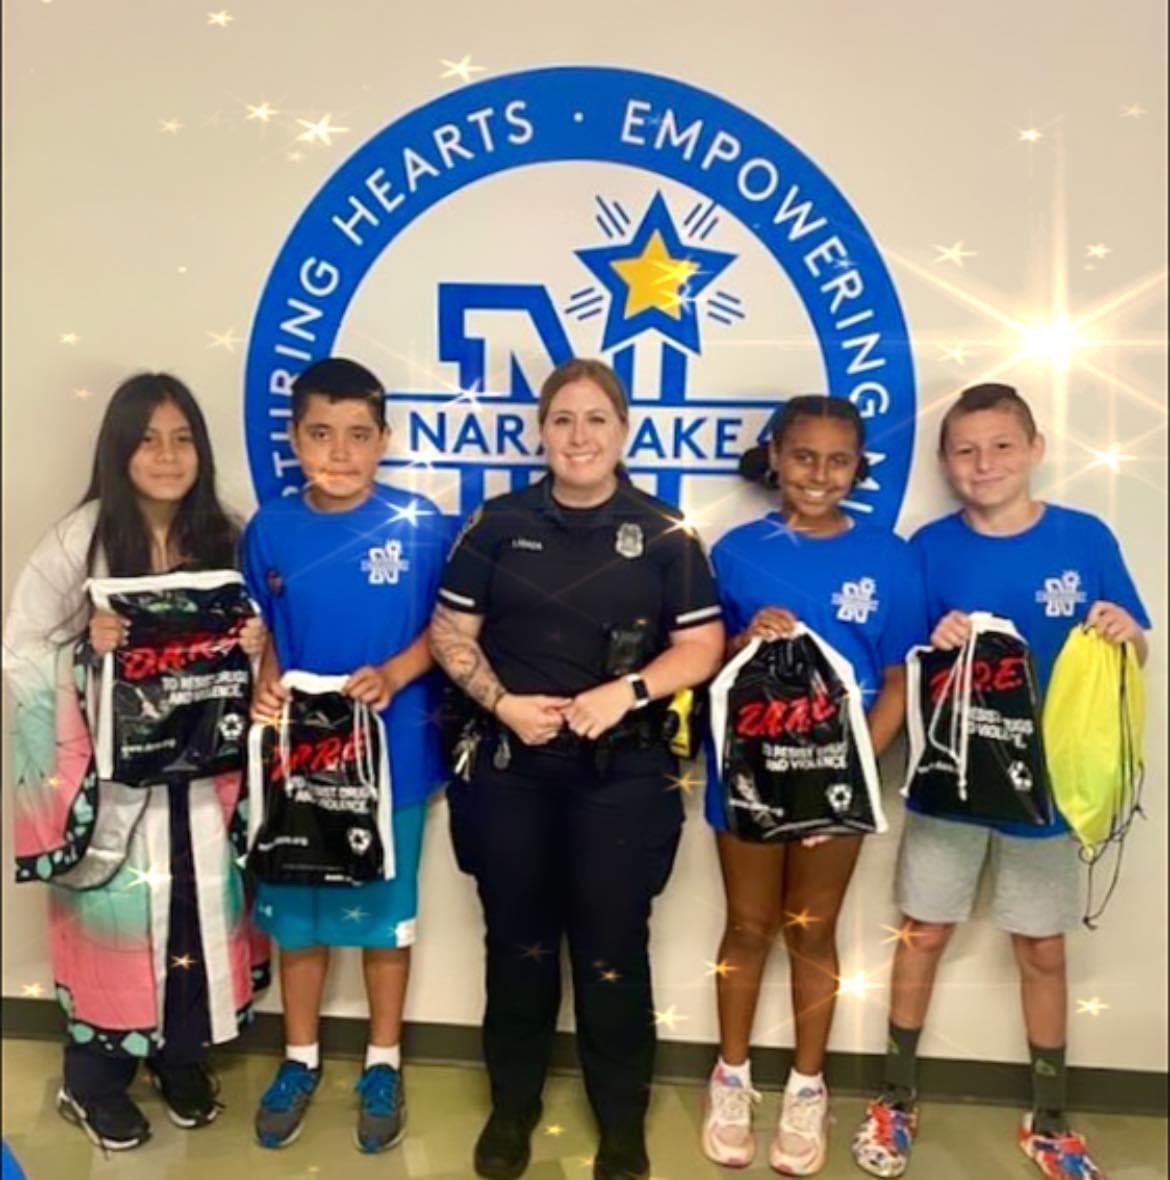 Congrats to @NaramakeES_CT    DARE essay contest winners!  Thank you to Ofc Prada and all the School Resource Officers for their commitment to our @Norwalk_CT kids! @TheHourNews @News12CT @NorwalkPS @norwalkpatch